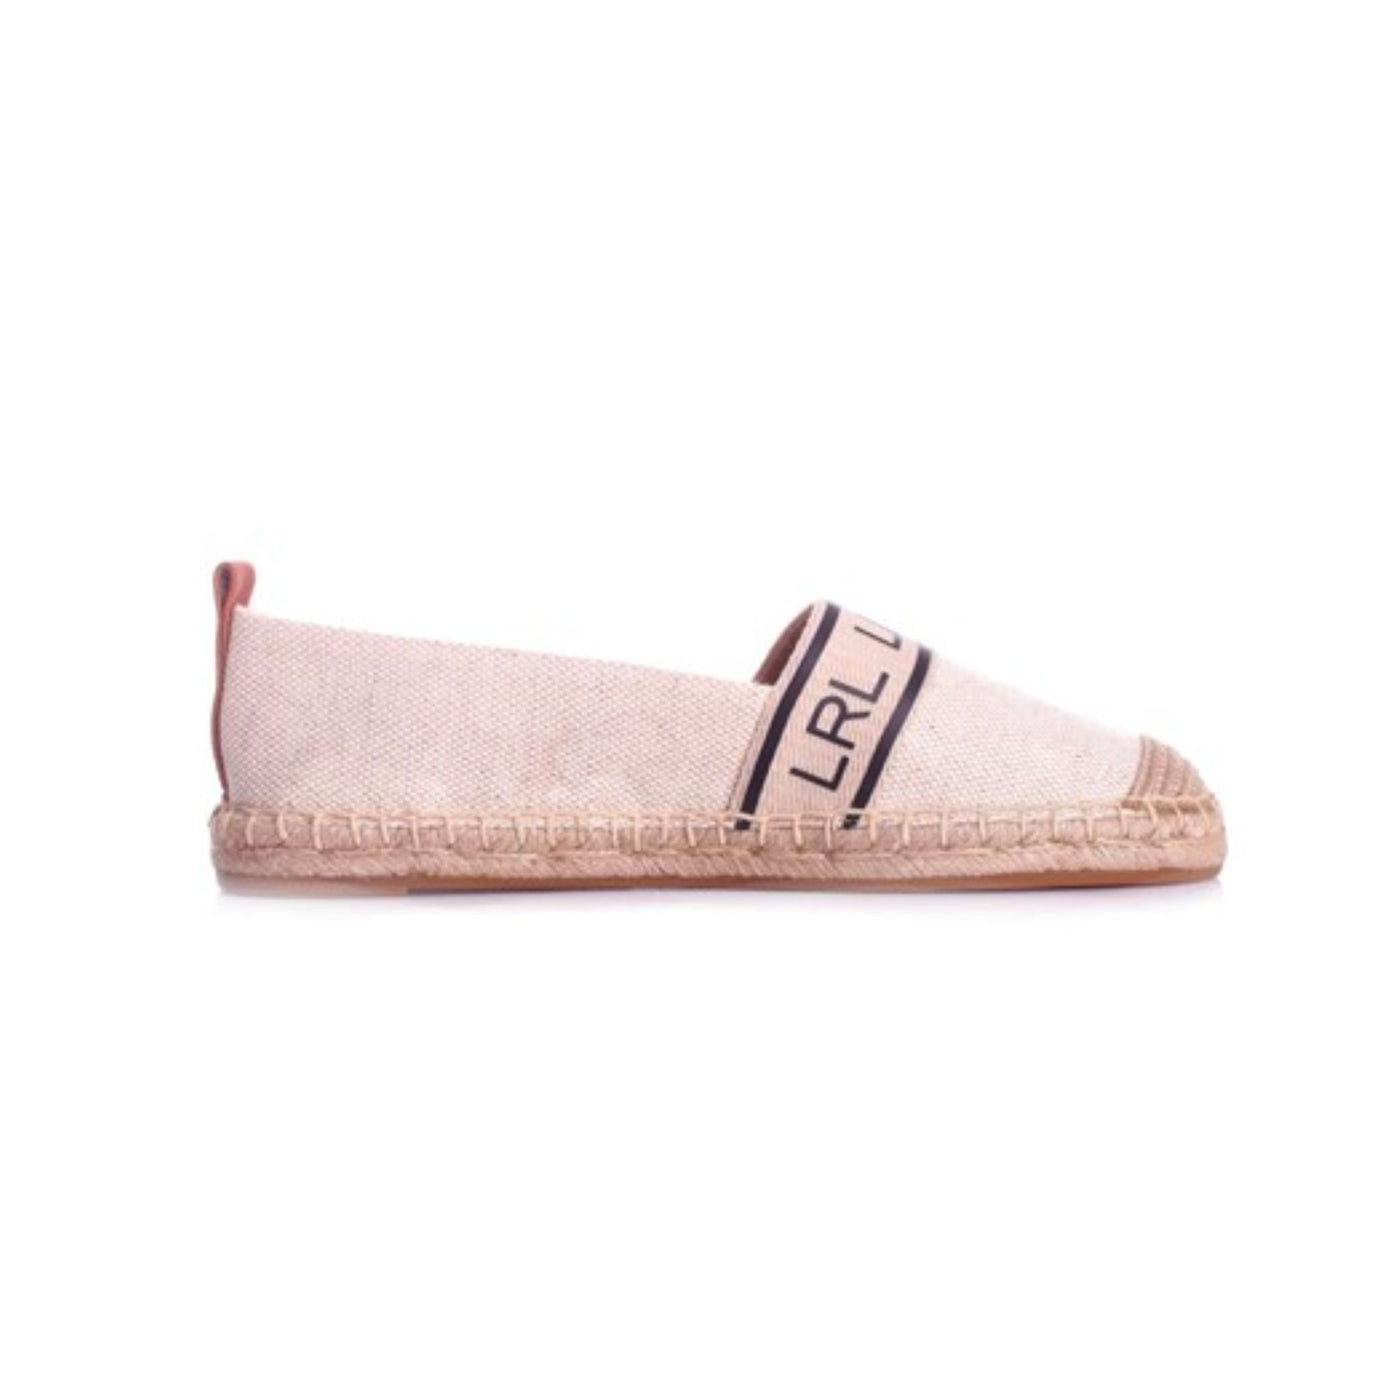 Women's espadrilles in canvas with logo